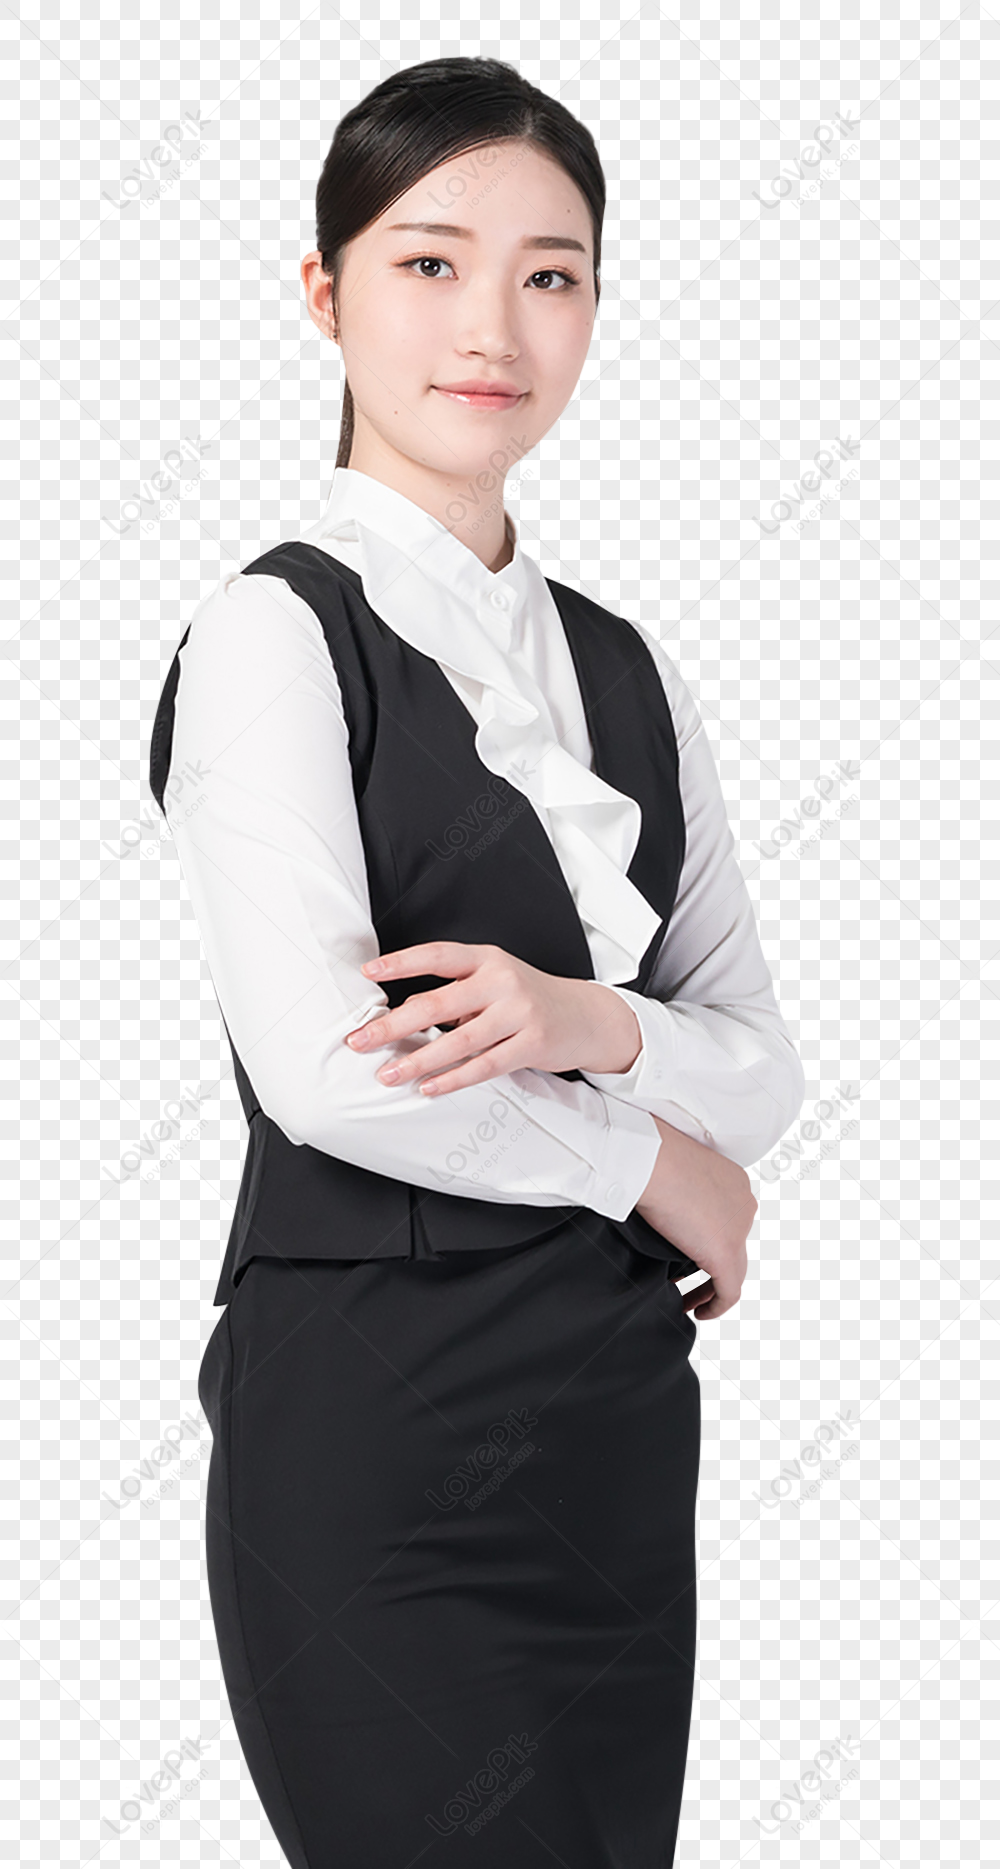 Stylish Professional Woman In Elegant Black Dress Gesturing Towards,  Businessperson, Product, Business Woman PNG Transparent Image and Clipart  for Free Download